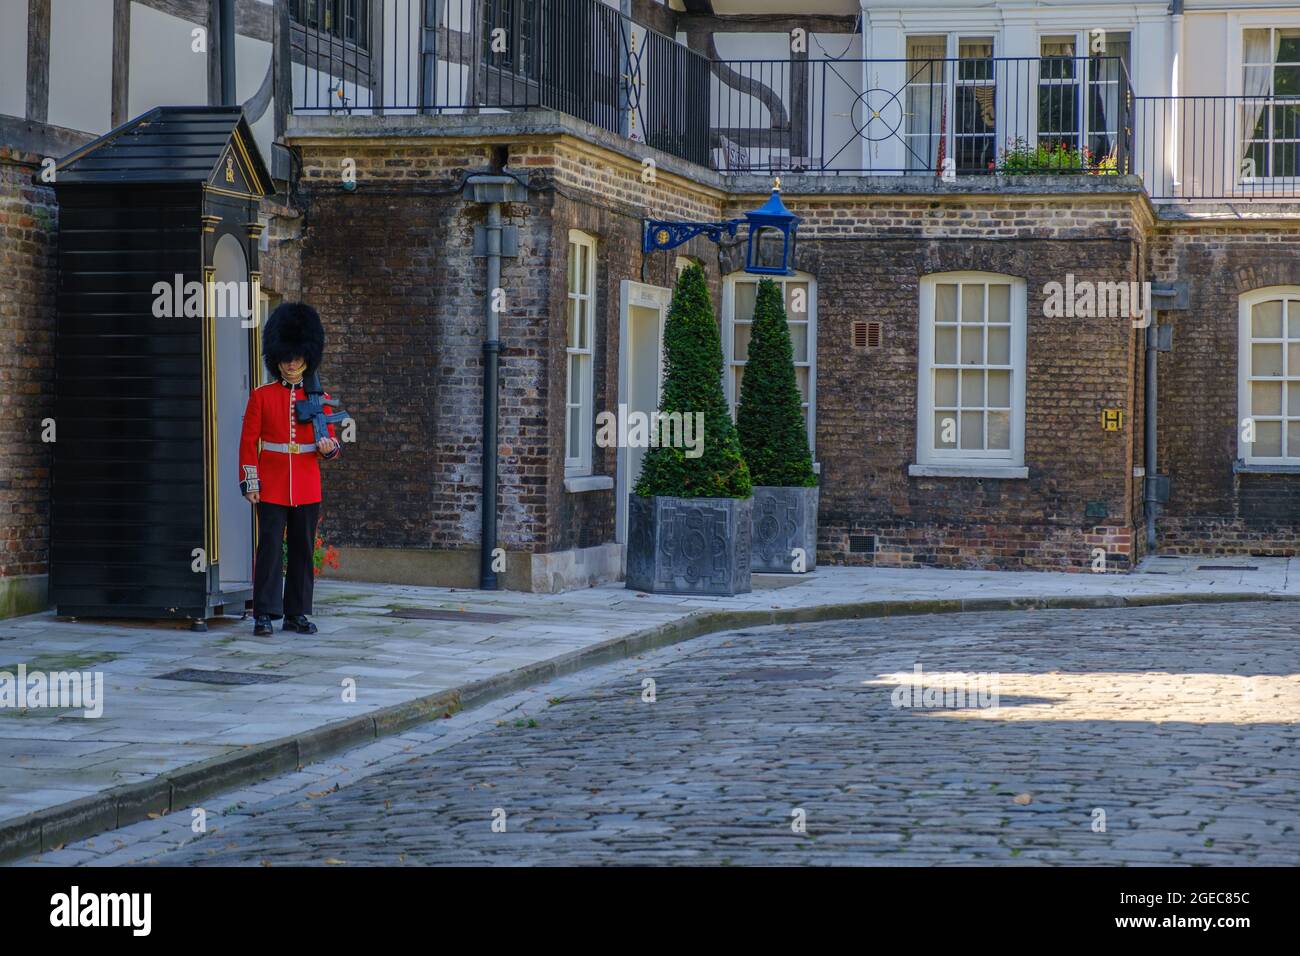 Staycation idea. Coldstream Guards sentry in military dress holding a gun posted at sentry box in front of the Queen's House at the Tower of London. Stock Photo